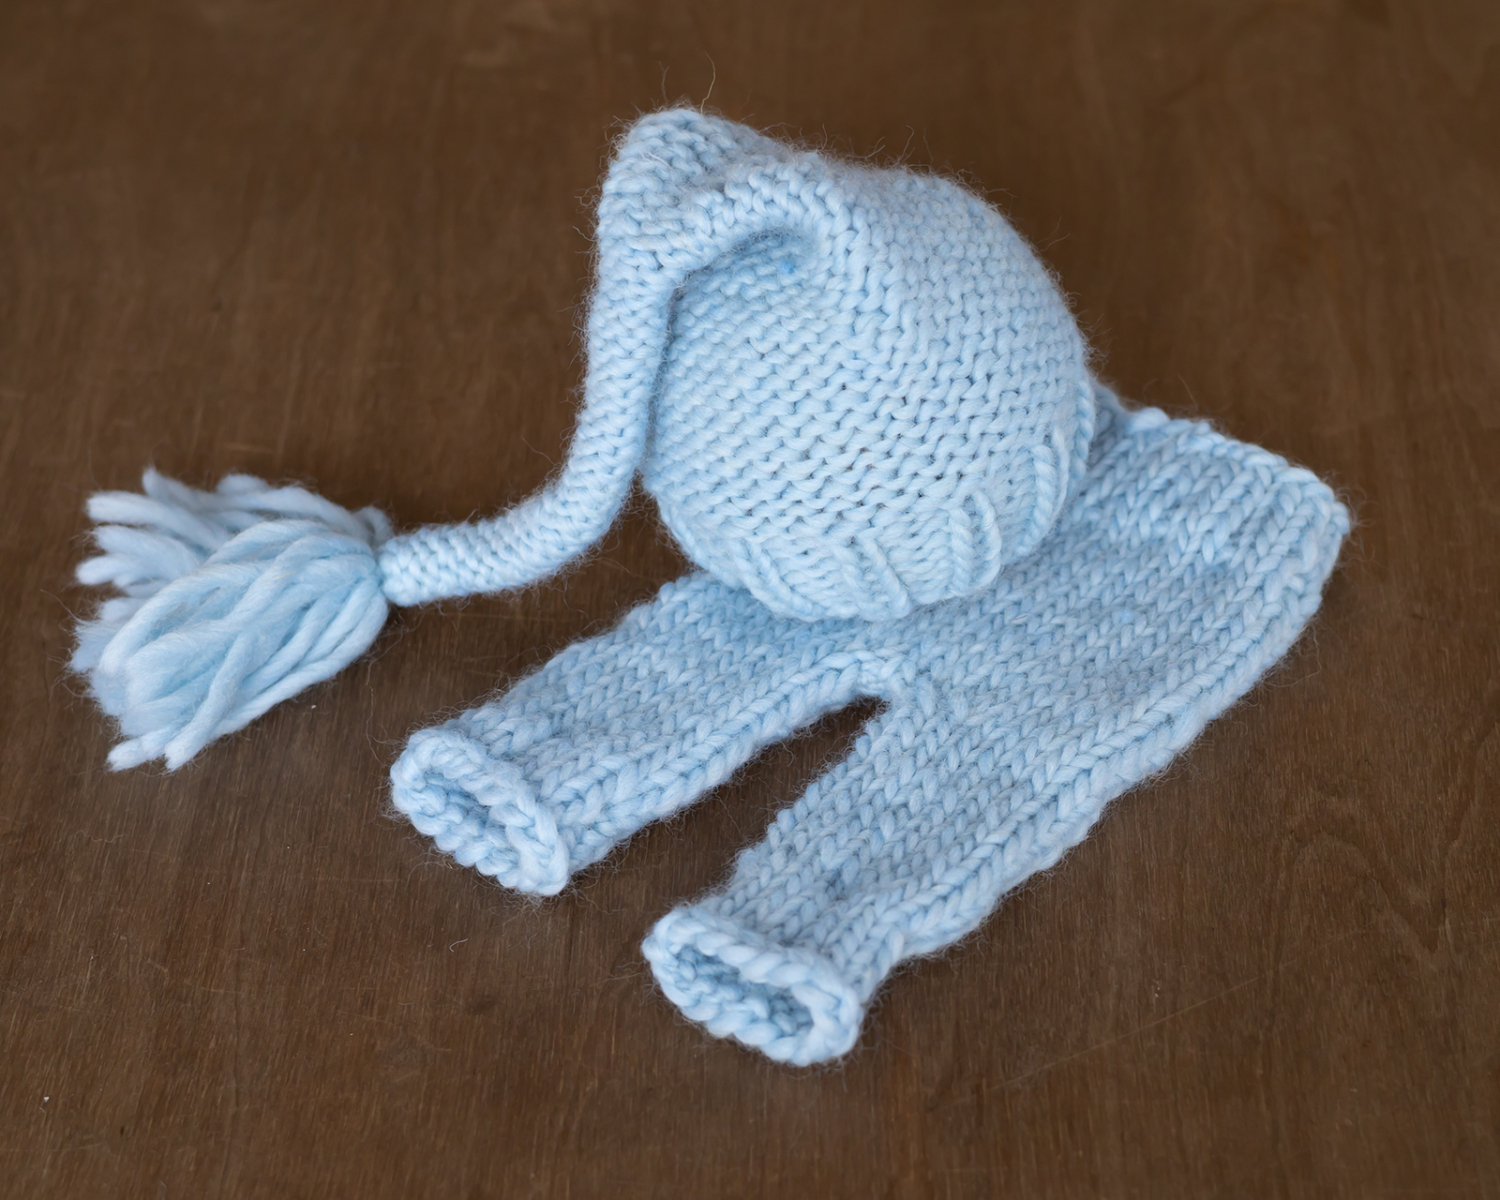 Blue Newborn Set: Pants and Sleapy Hat